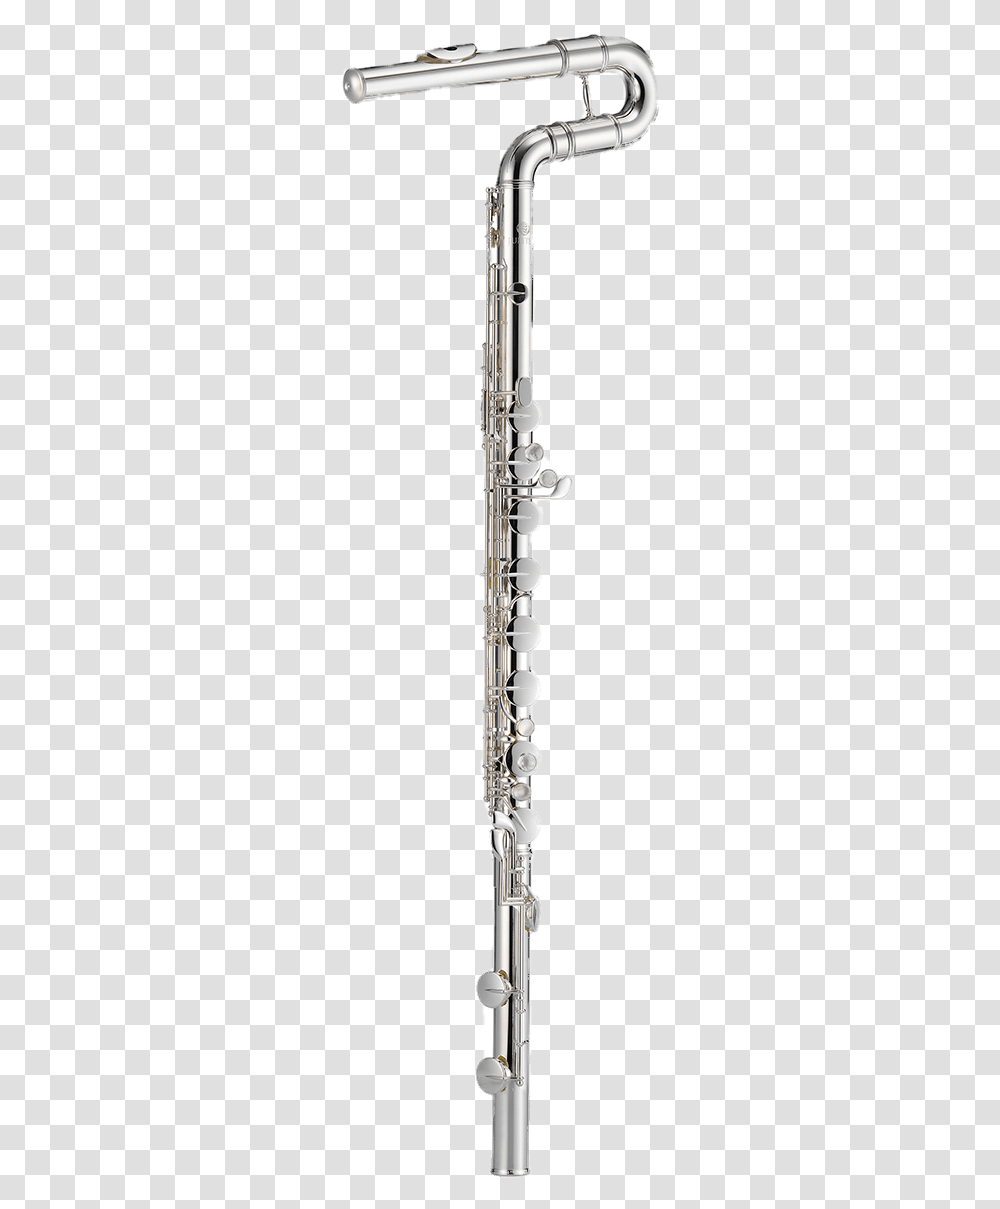 Jupiter Bass Flute Piccolo Clarinet, Leisure Activities, Musical Instrument, Oboe, Shower Faucet Transparent Png